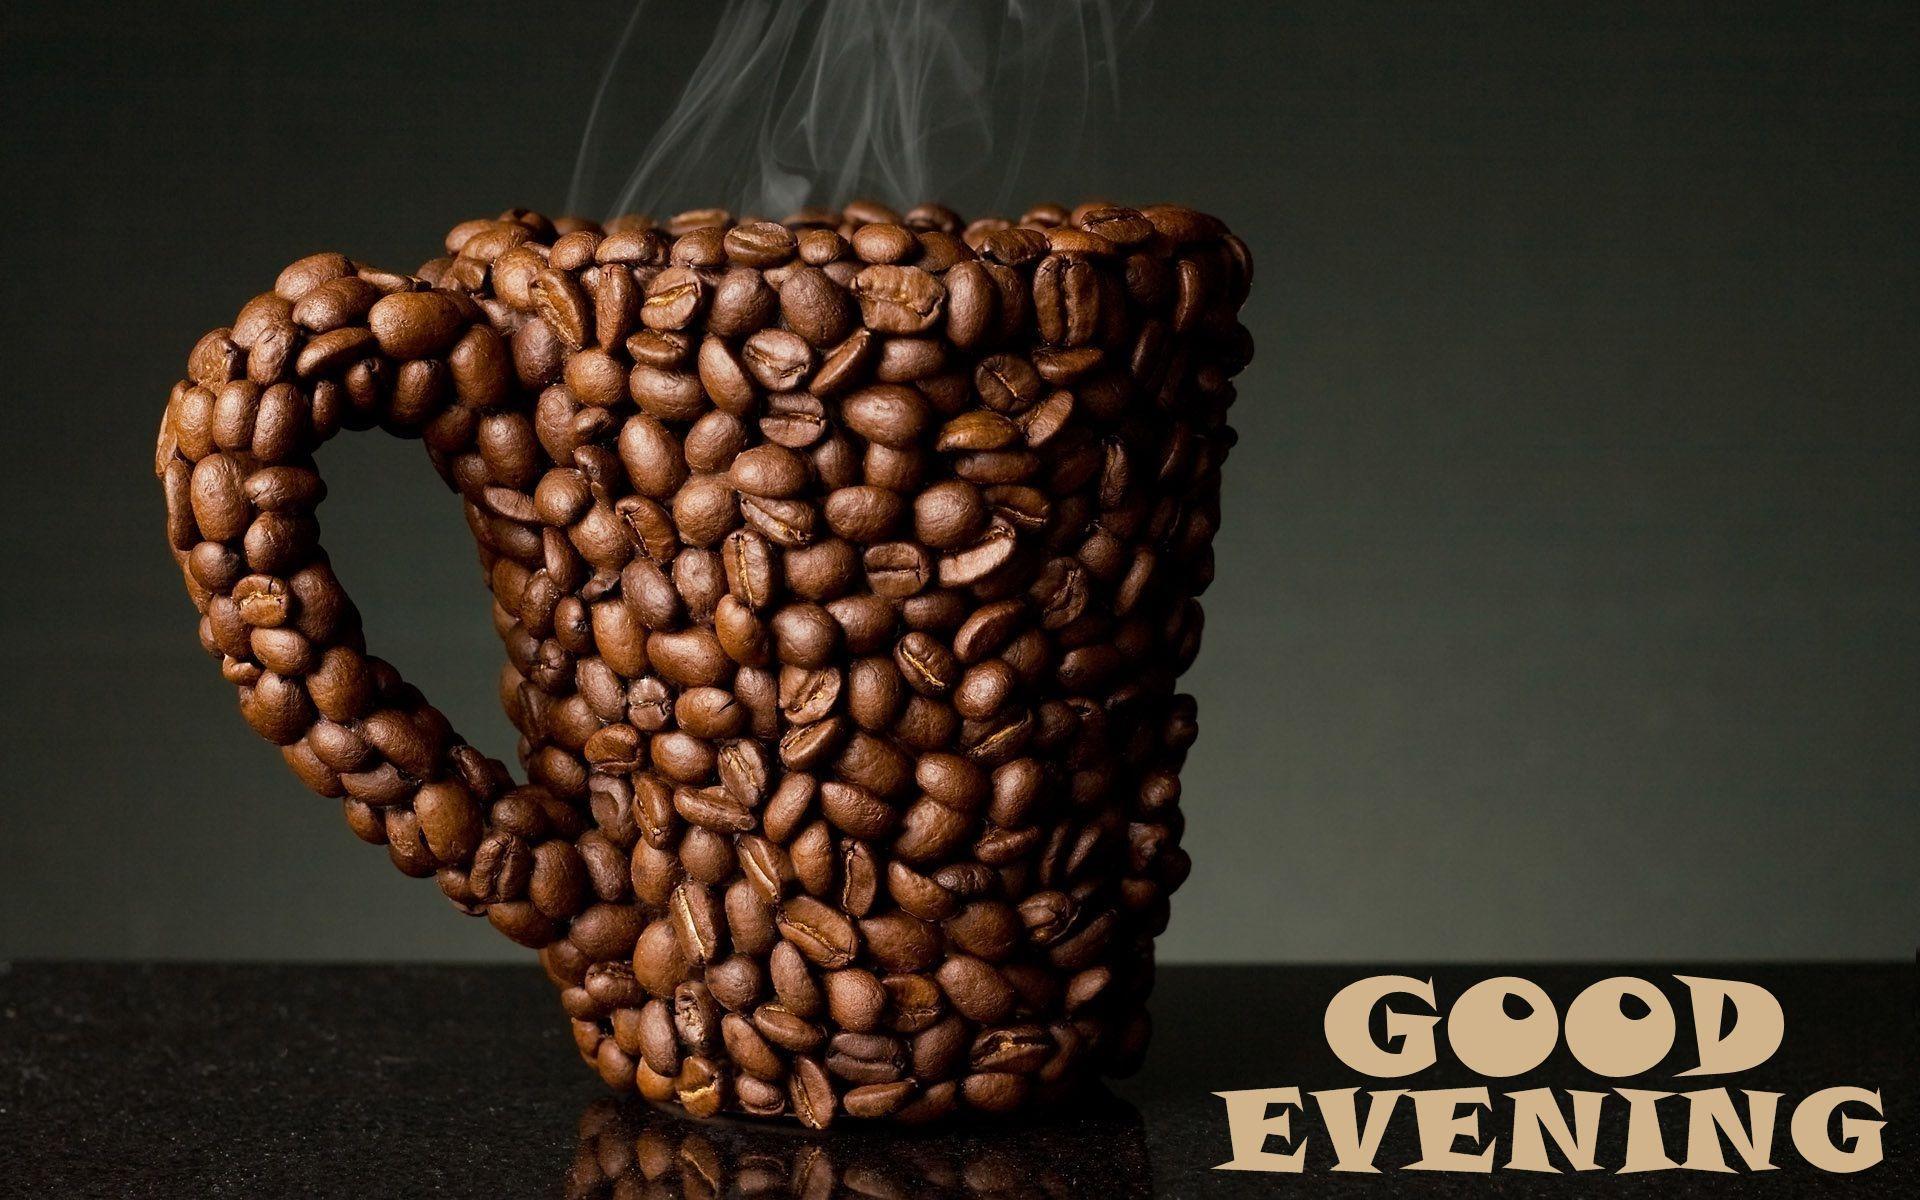 Download Good Evening Wallpaper With Coffee Gallery